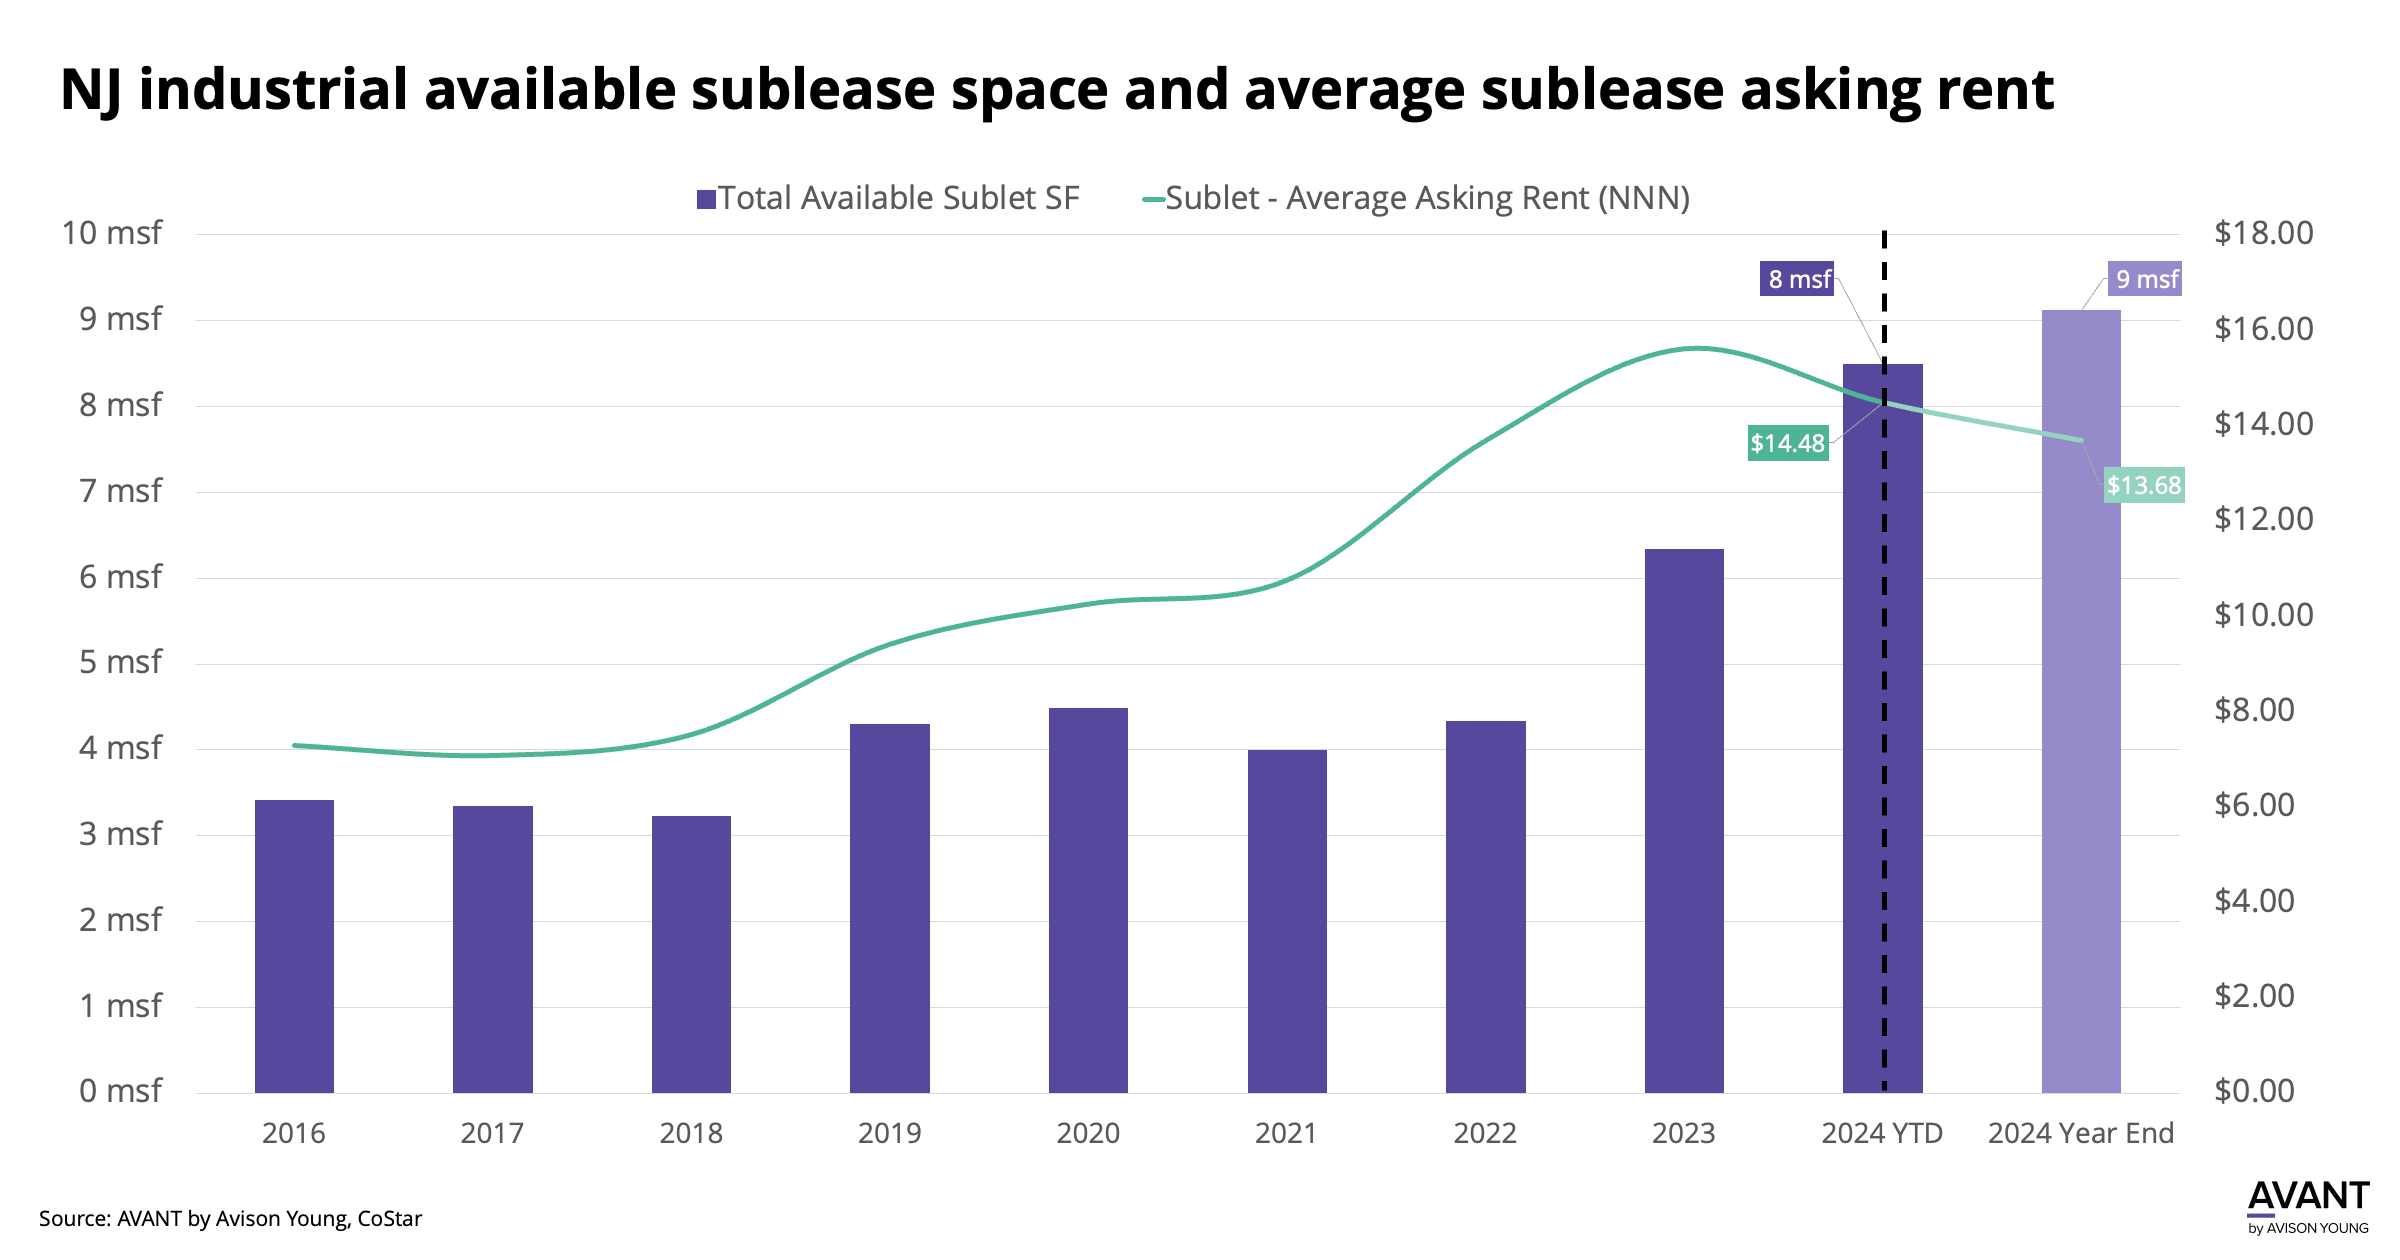 graph of New Jersey industrial available sublease space and average sublease asking rent from 2016 to 2024